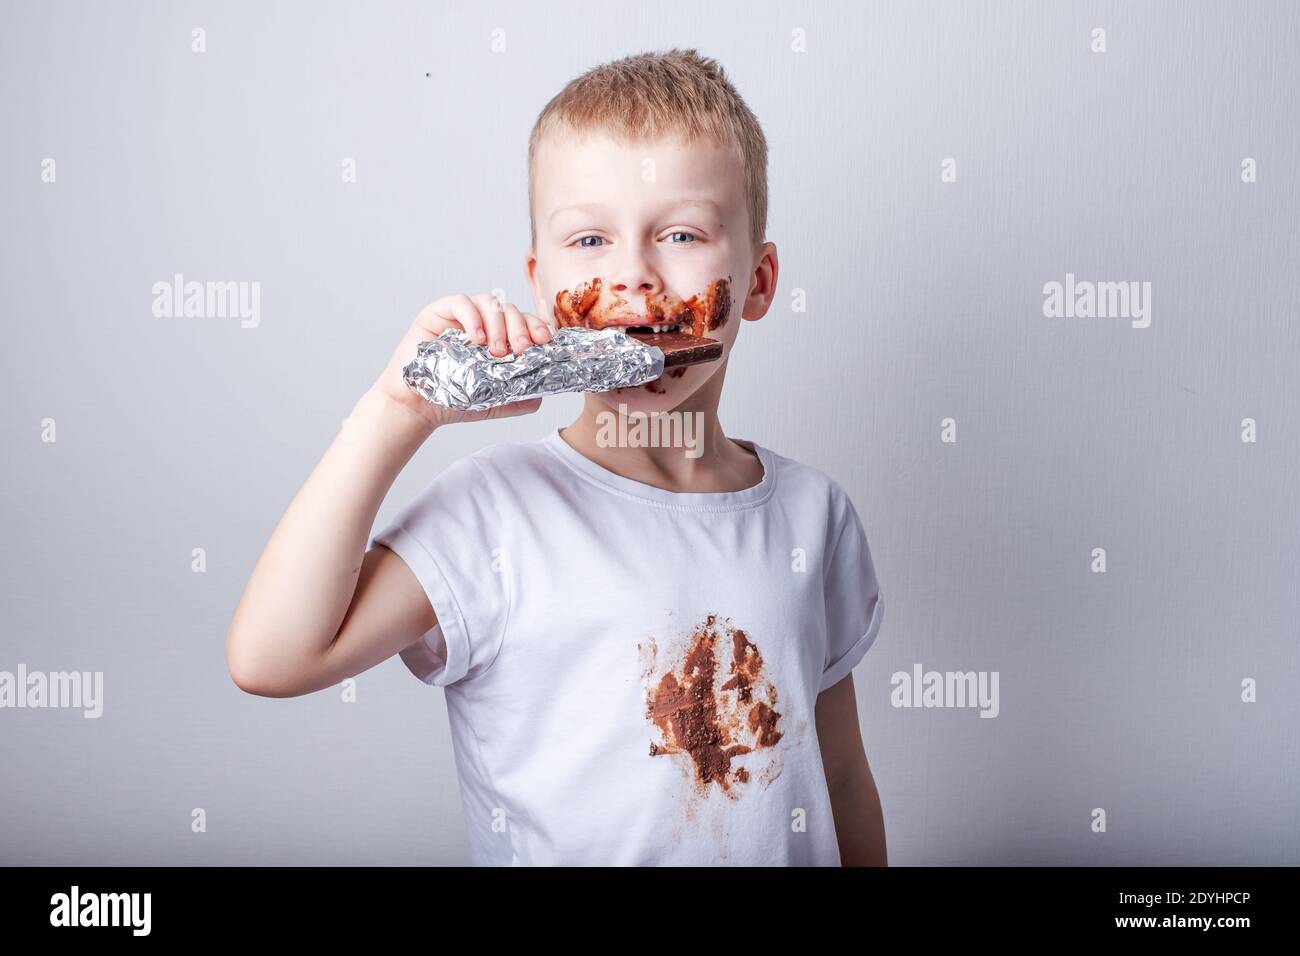 Boy eating a bar of chocolate in his grin and smeared clothes. High quality photo Stock Photo